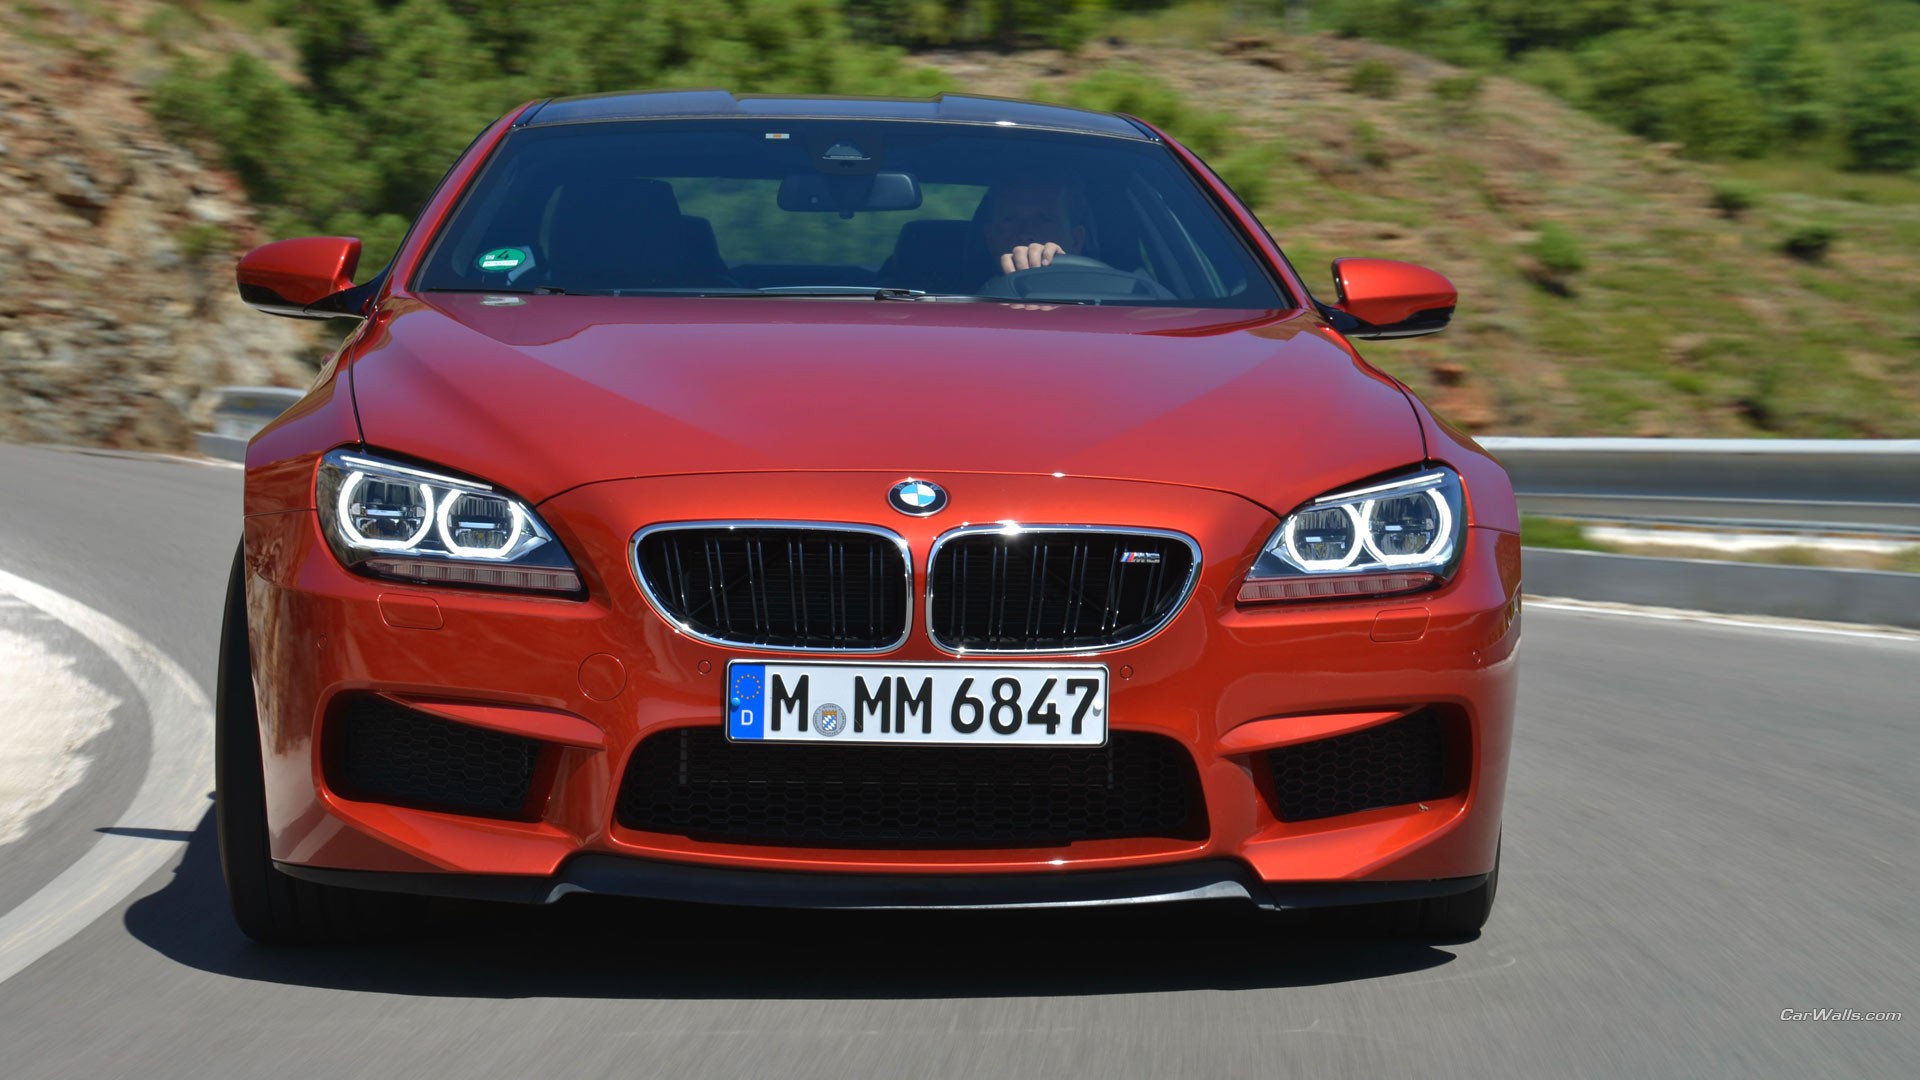 General 1920x1080 BMW M6 coupe BMW red cars road vehicle BMW 6 Series BMW F12/F13/F06 German cars